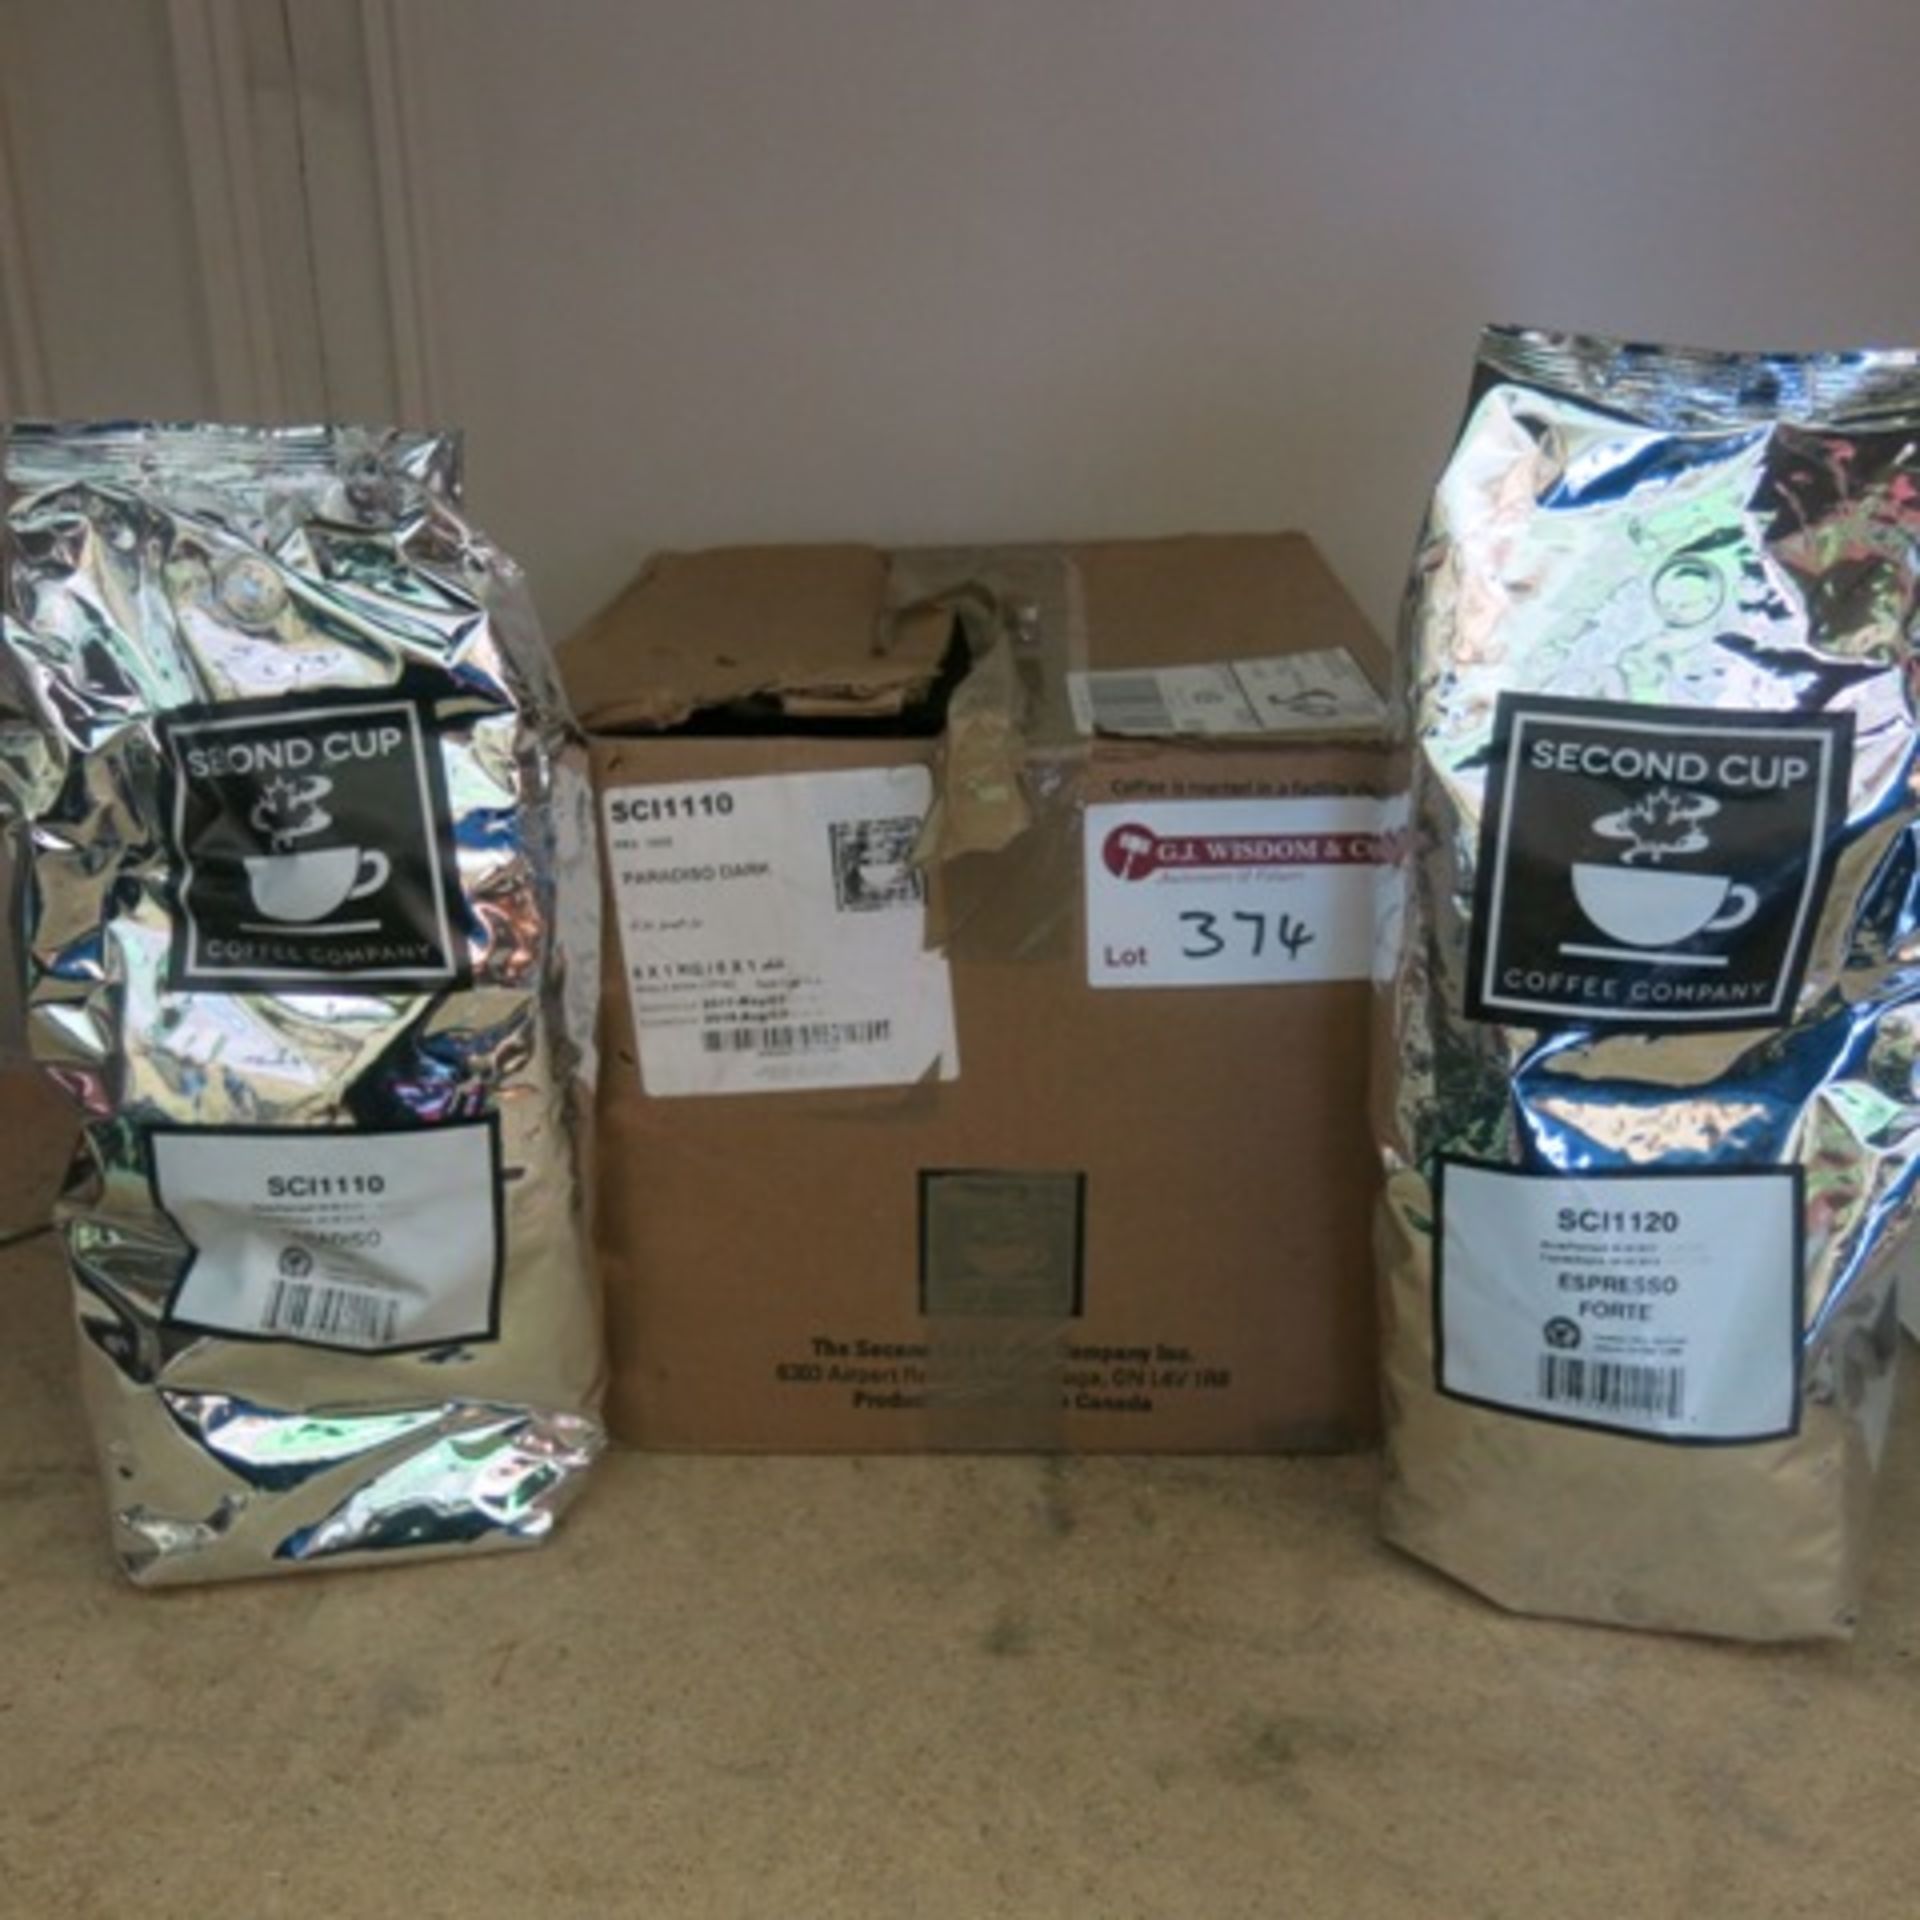 5 Boxes of 6 x 1kg Bags of Rainforest Alliance Certified Whole Bean Coffee to Include: 3 x Boxes